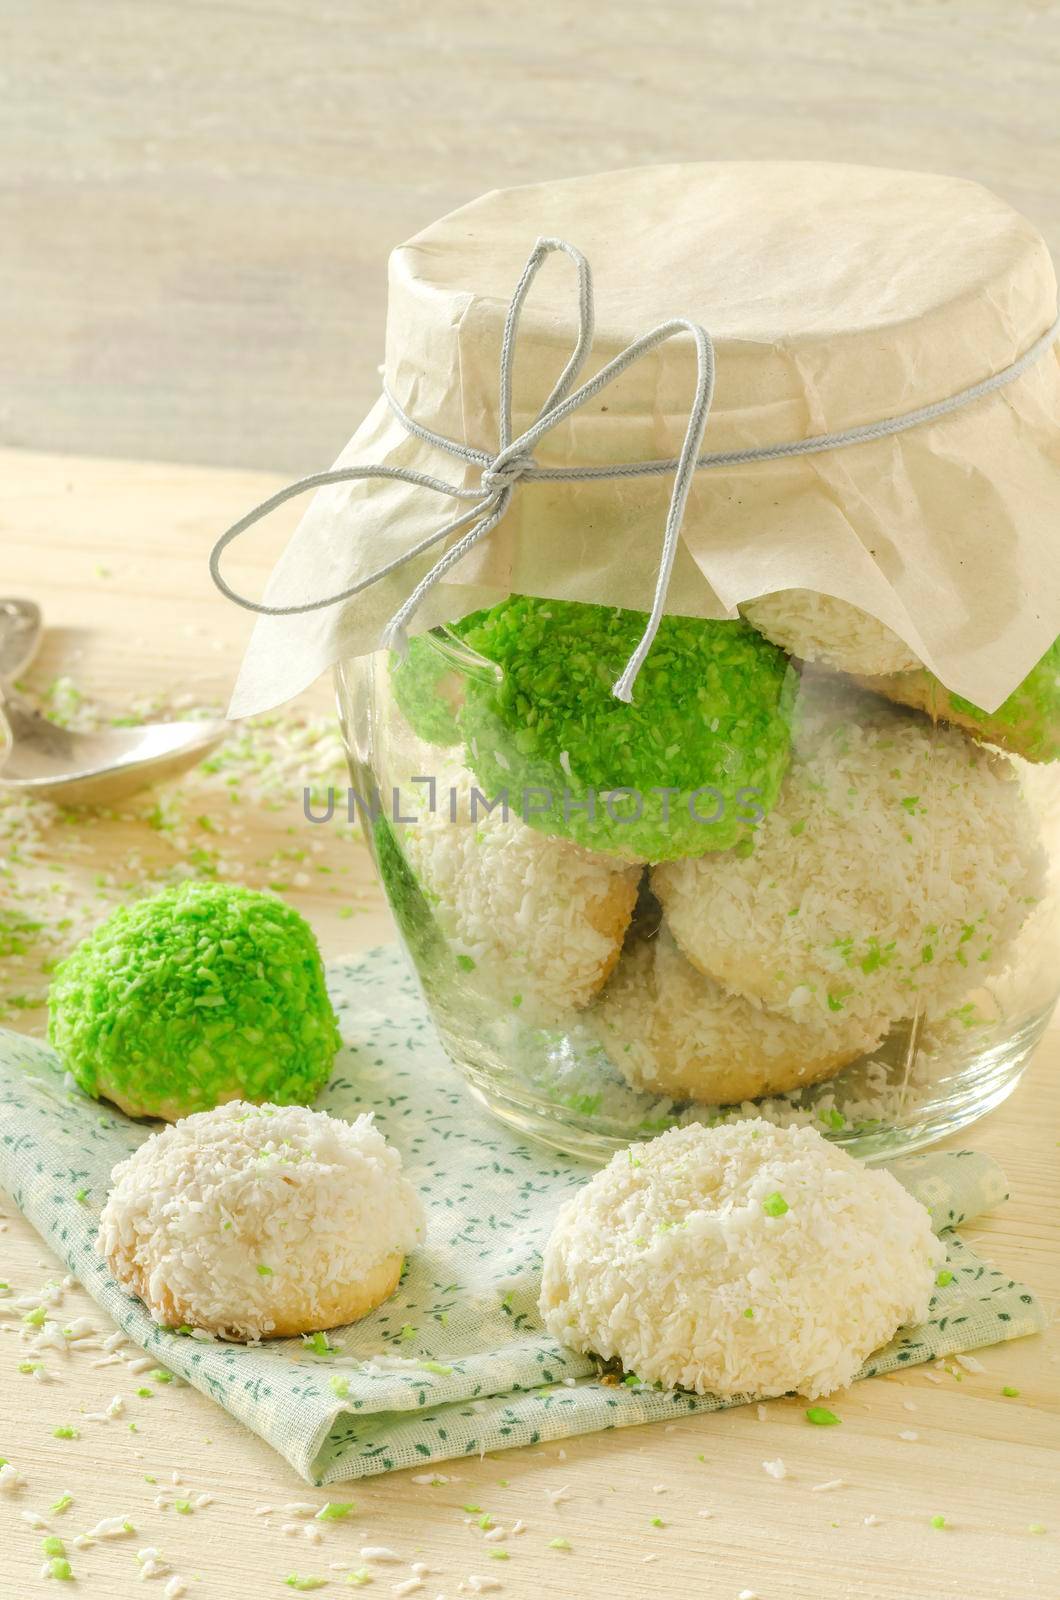 Sugar cookies with coconut flakes in glass jar. Near napkin. Selective focus